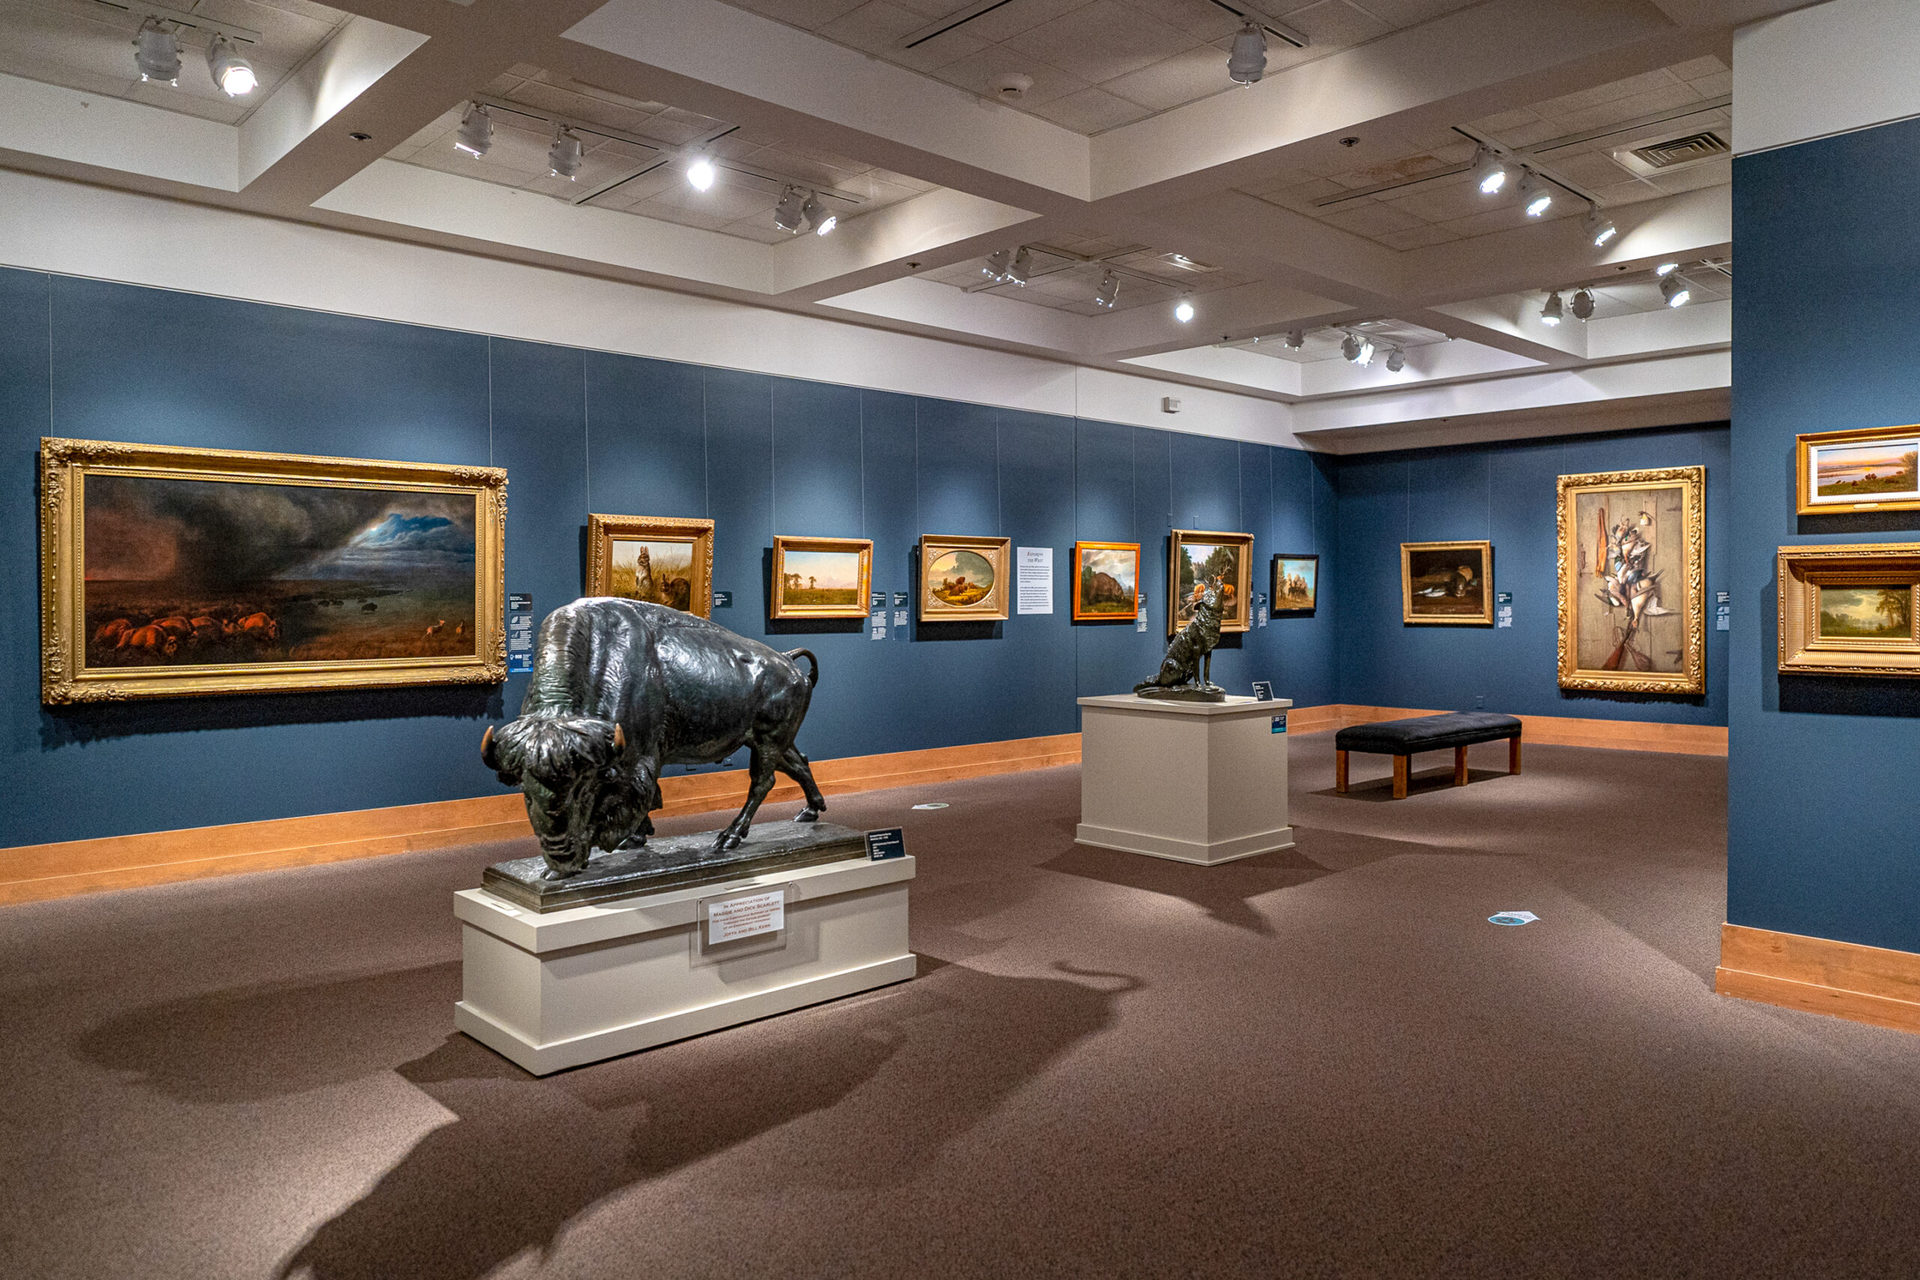 A gallery in an art museum featuring framed paintings hung on a blue wall and animal sculptures in the center of the well-lit room